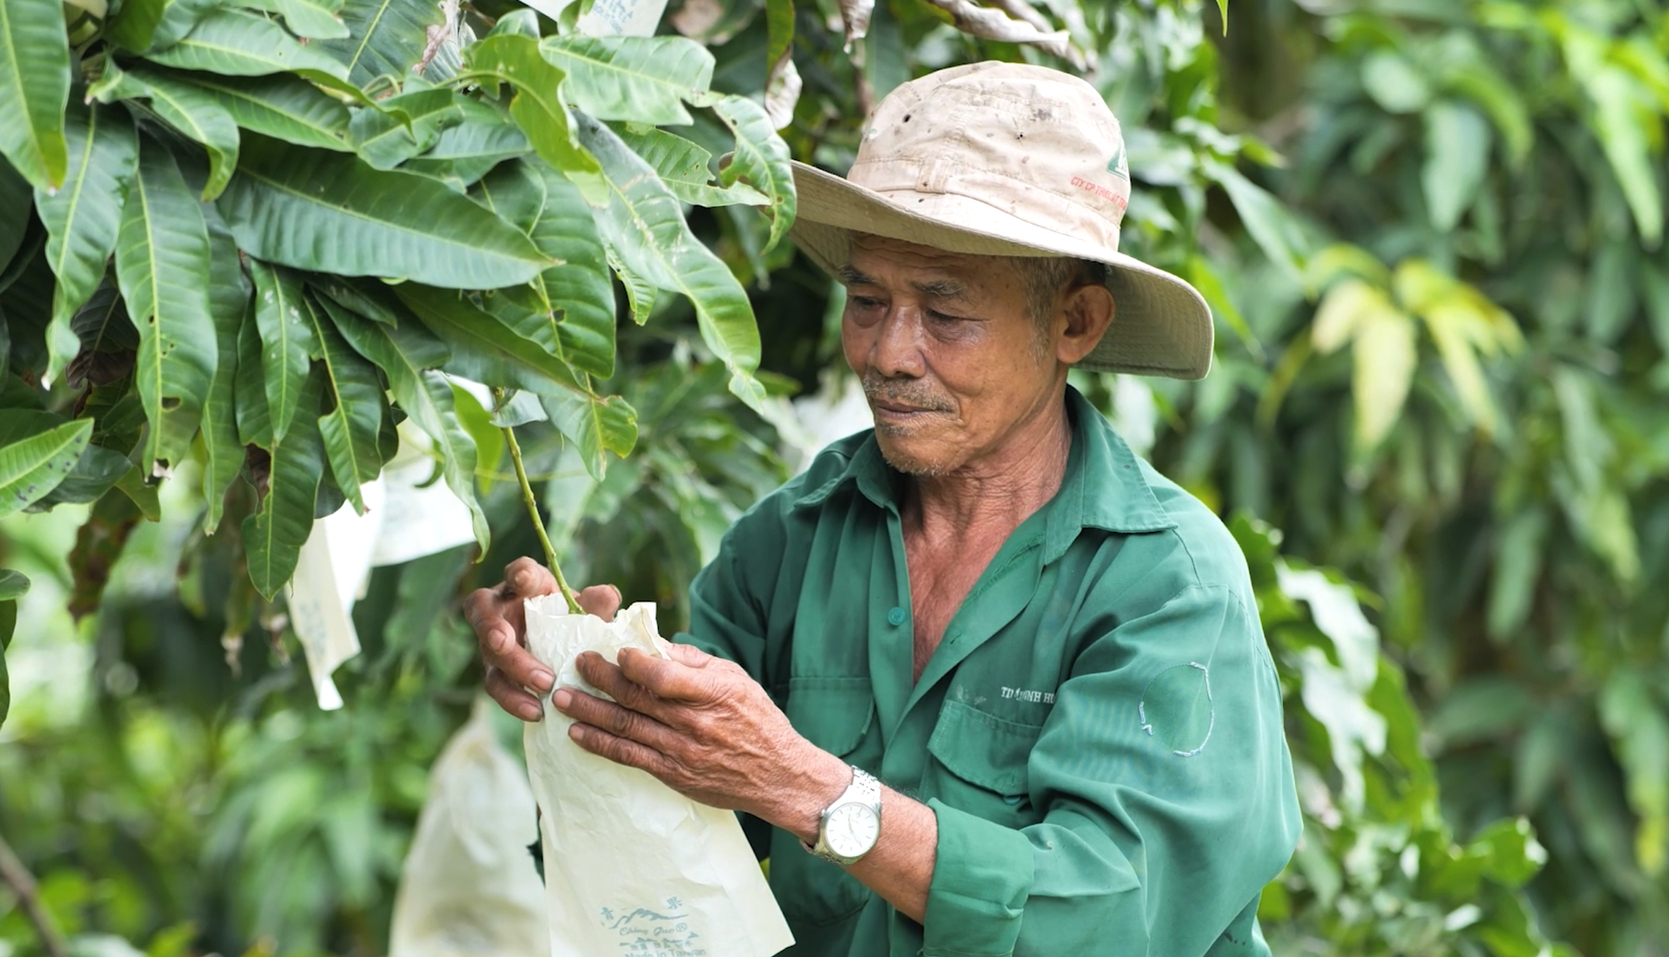 Farmers are instructed on mango care techniques according to the process to 'conquer' fastidious markets.